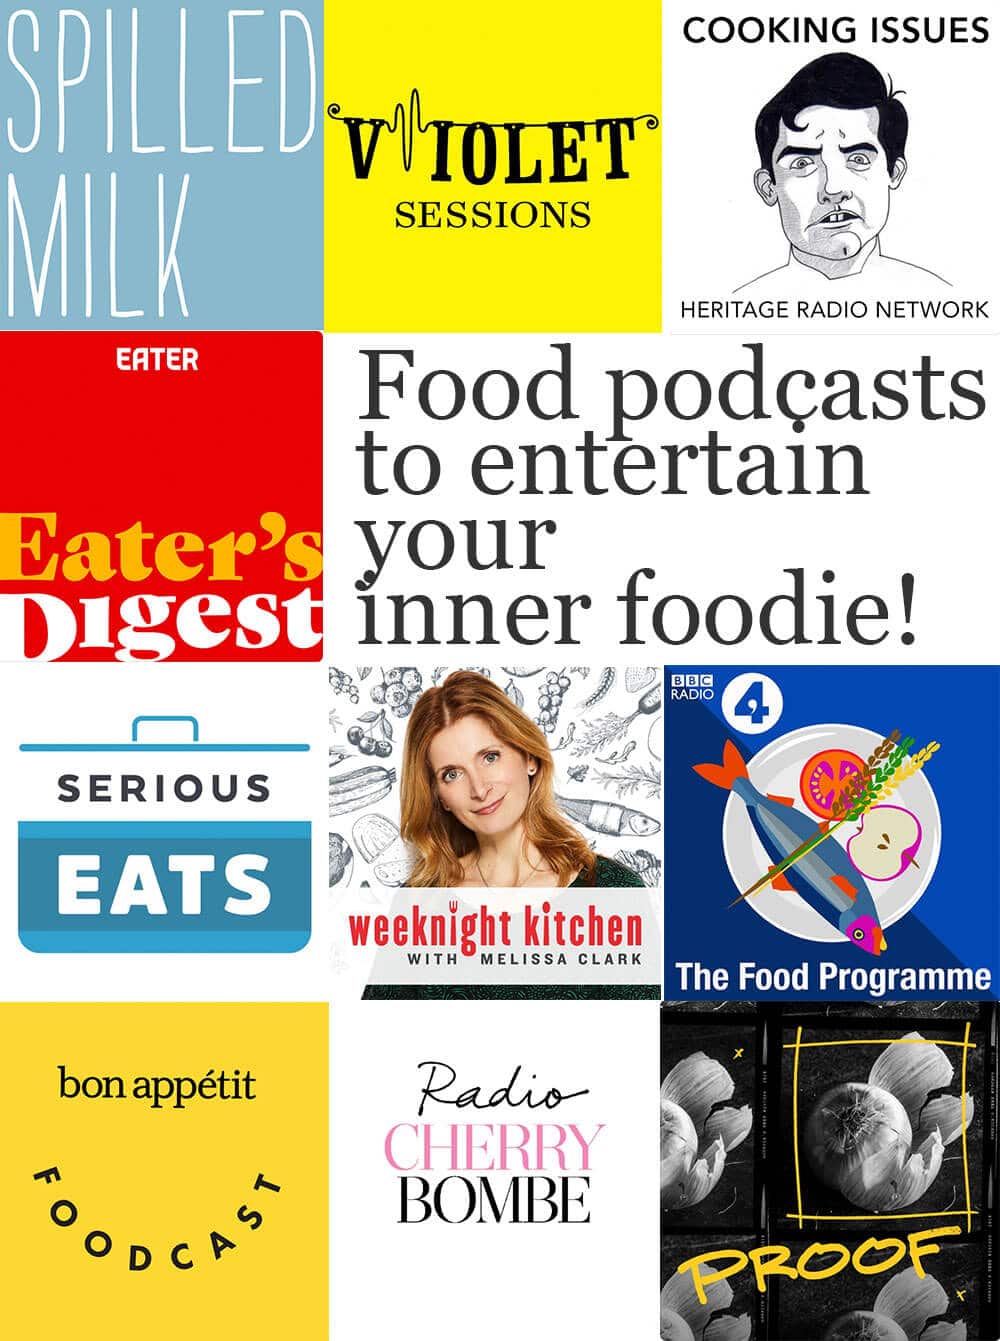 Logos of food podcasts spilled milk, violet sessions, cooking issues, eater's digest, serious eats, weeknight cooking with Melissa Clark, The Food Programme, Bon Appétit Foodcast, Radio Cherry Bomb, Proof